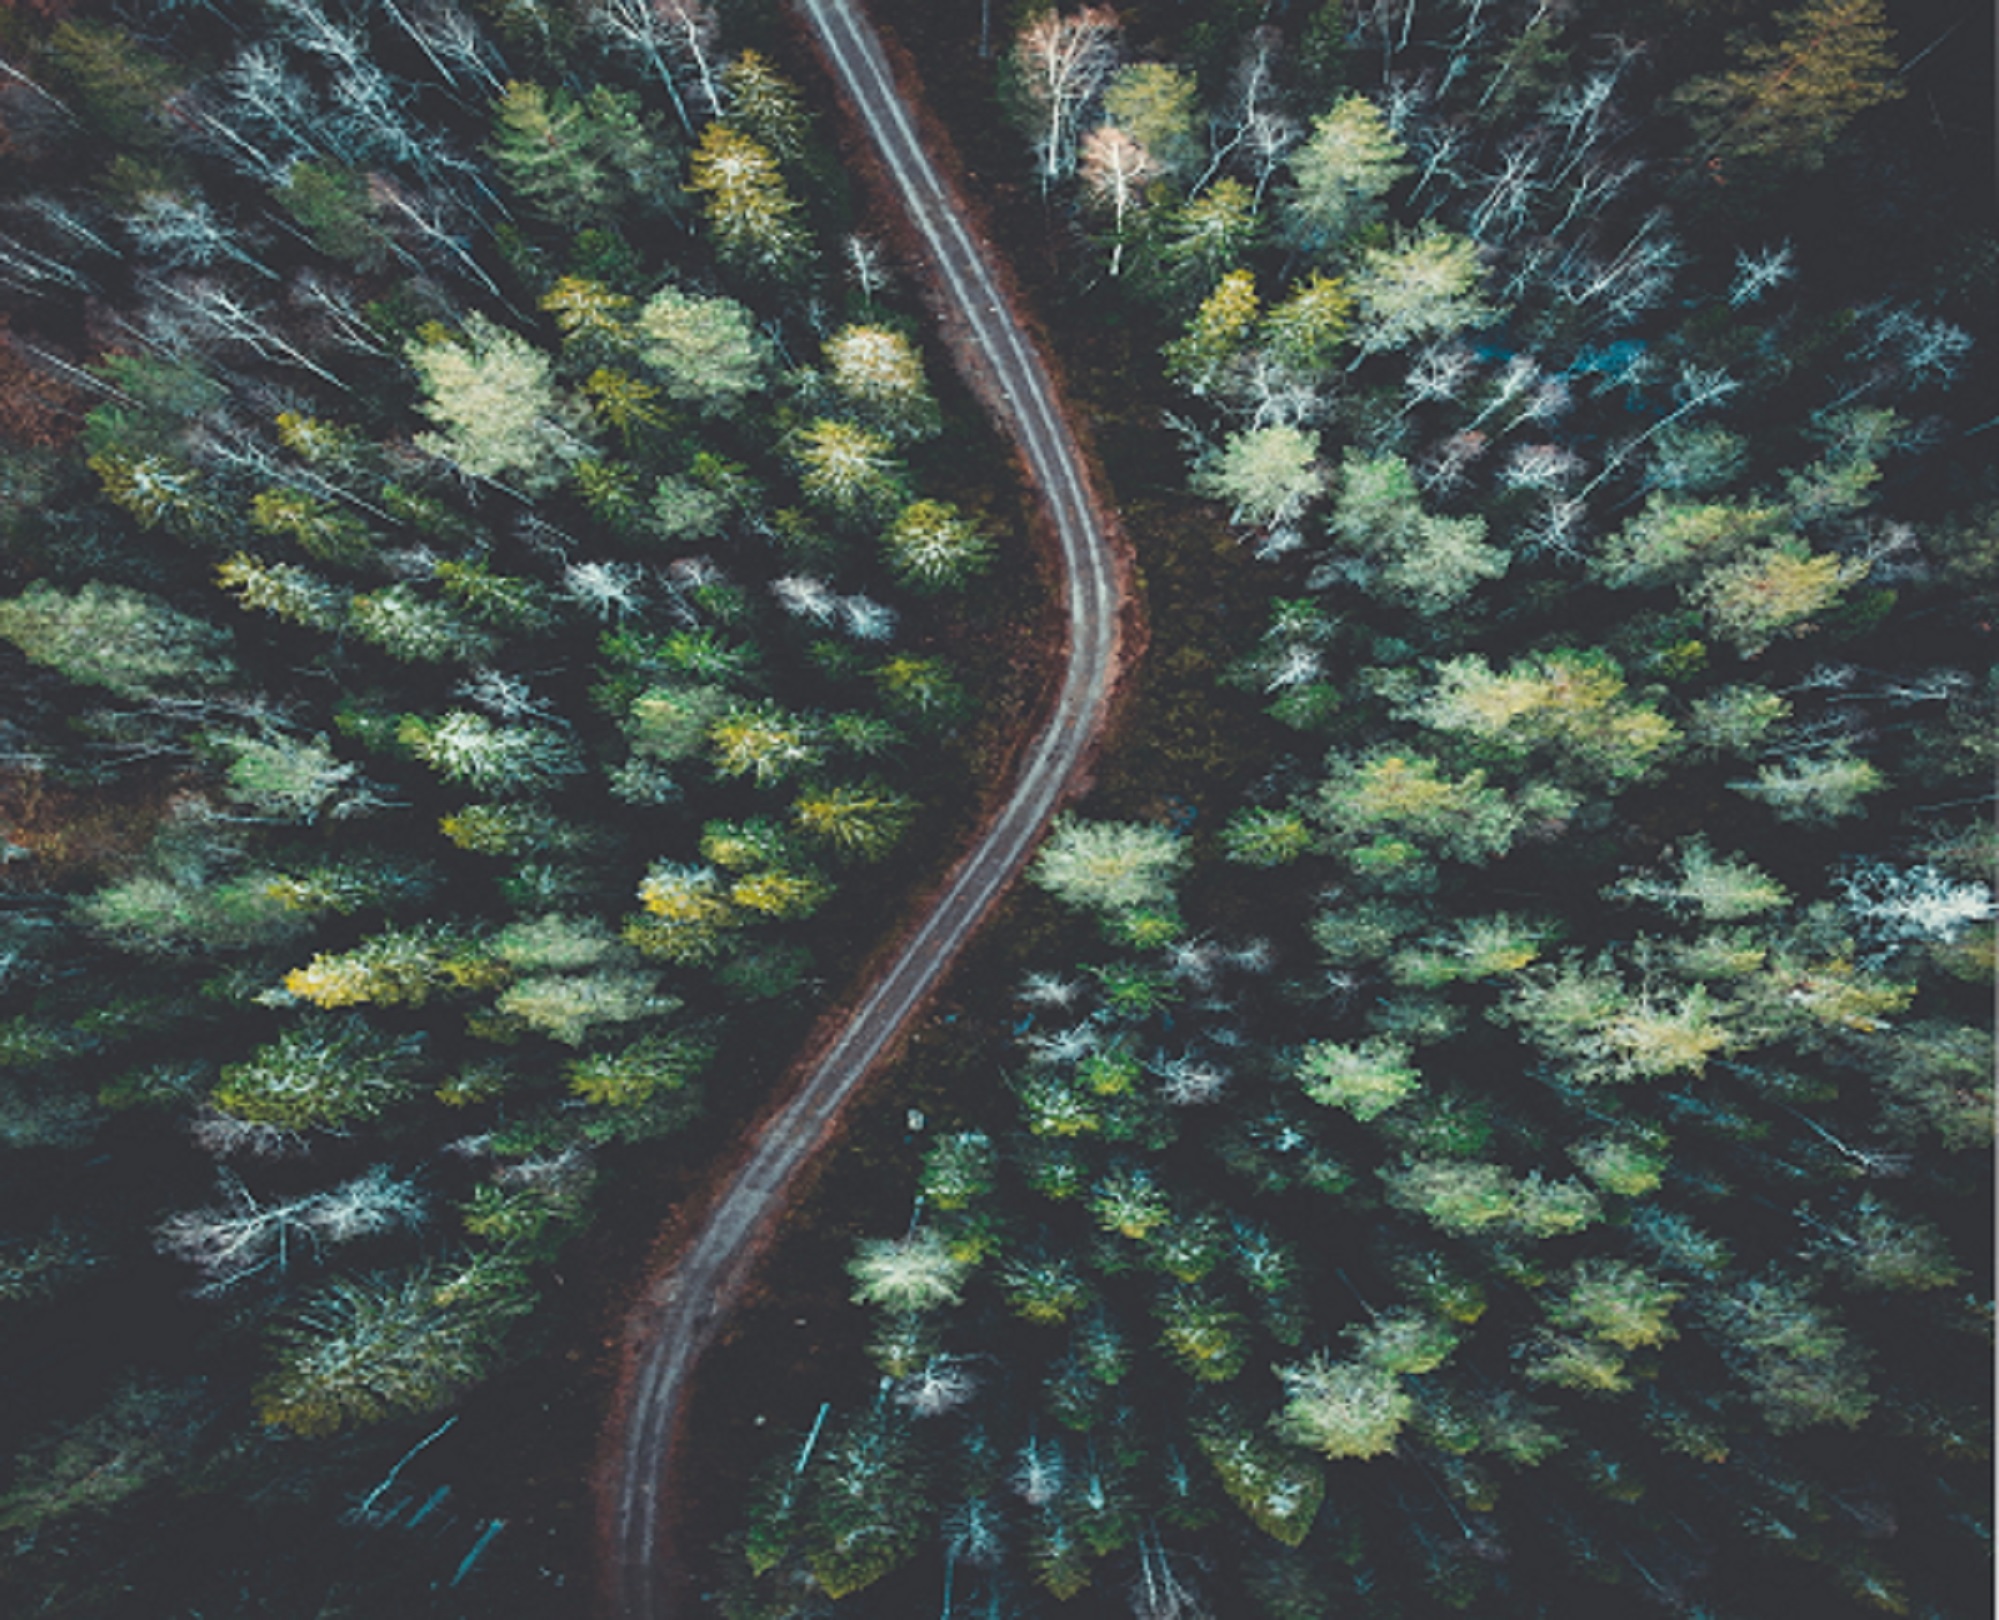 An image of a road with many turns through a forest